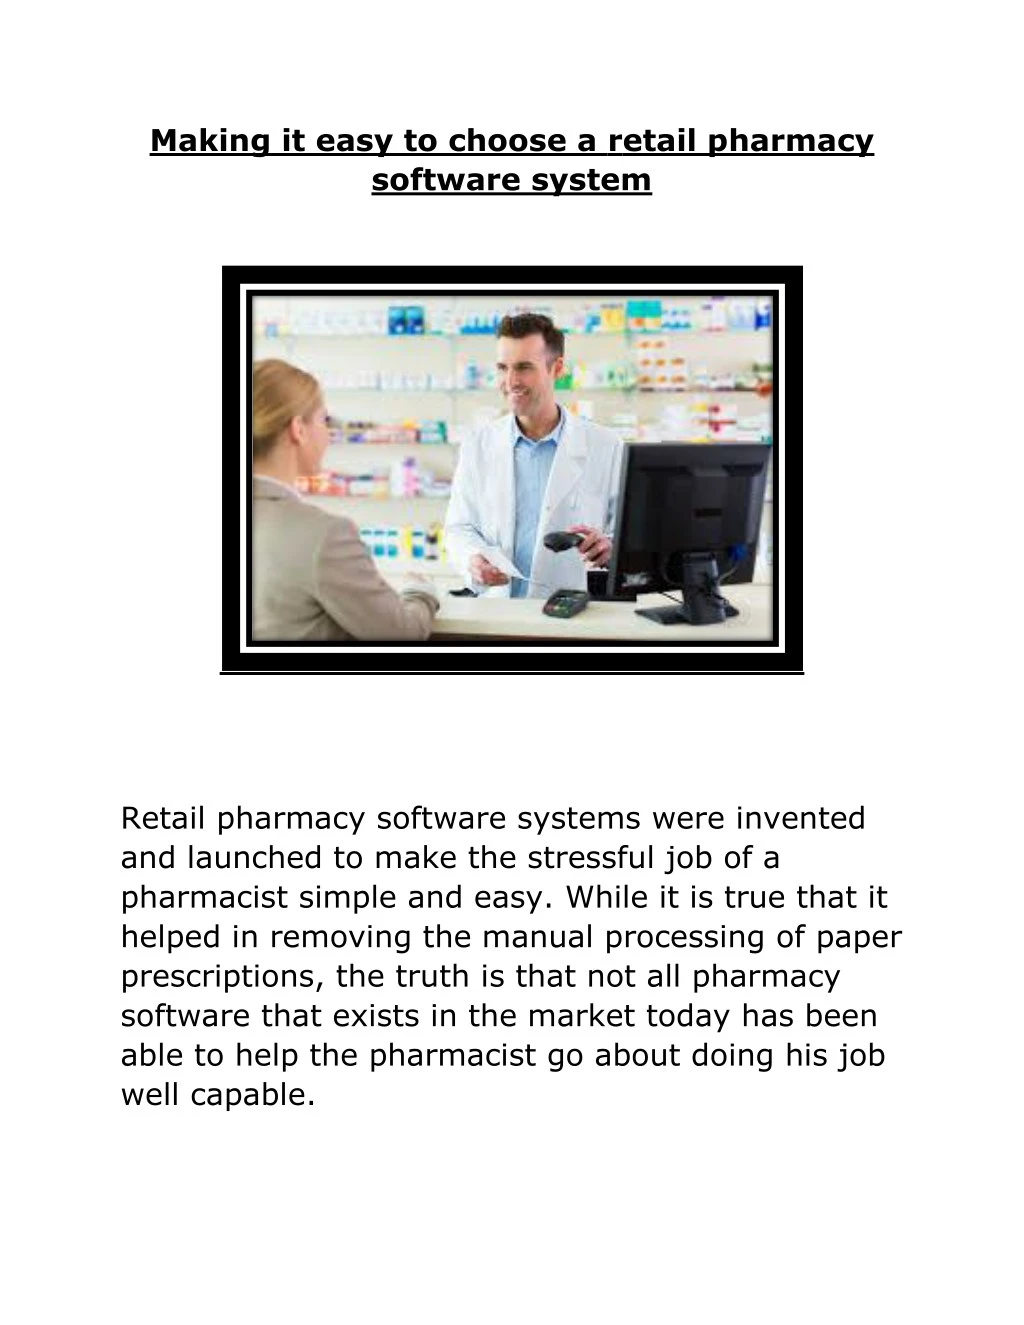 making it easy to choose a retail pharmacy